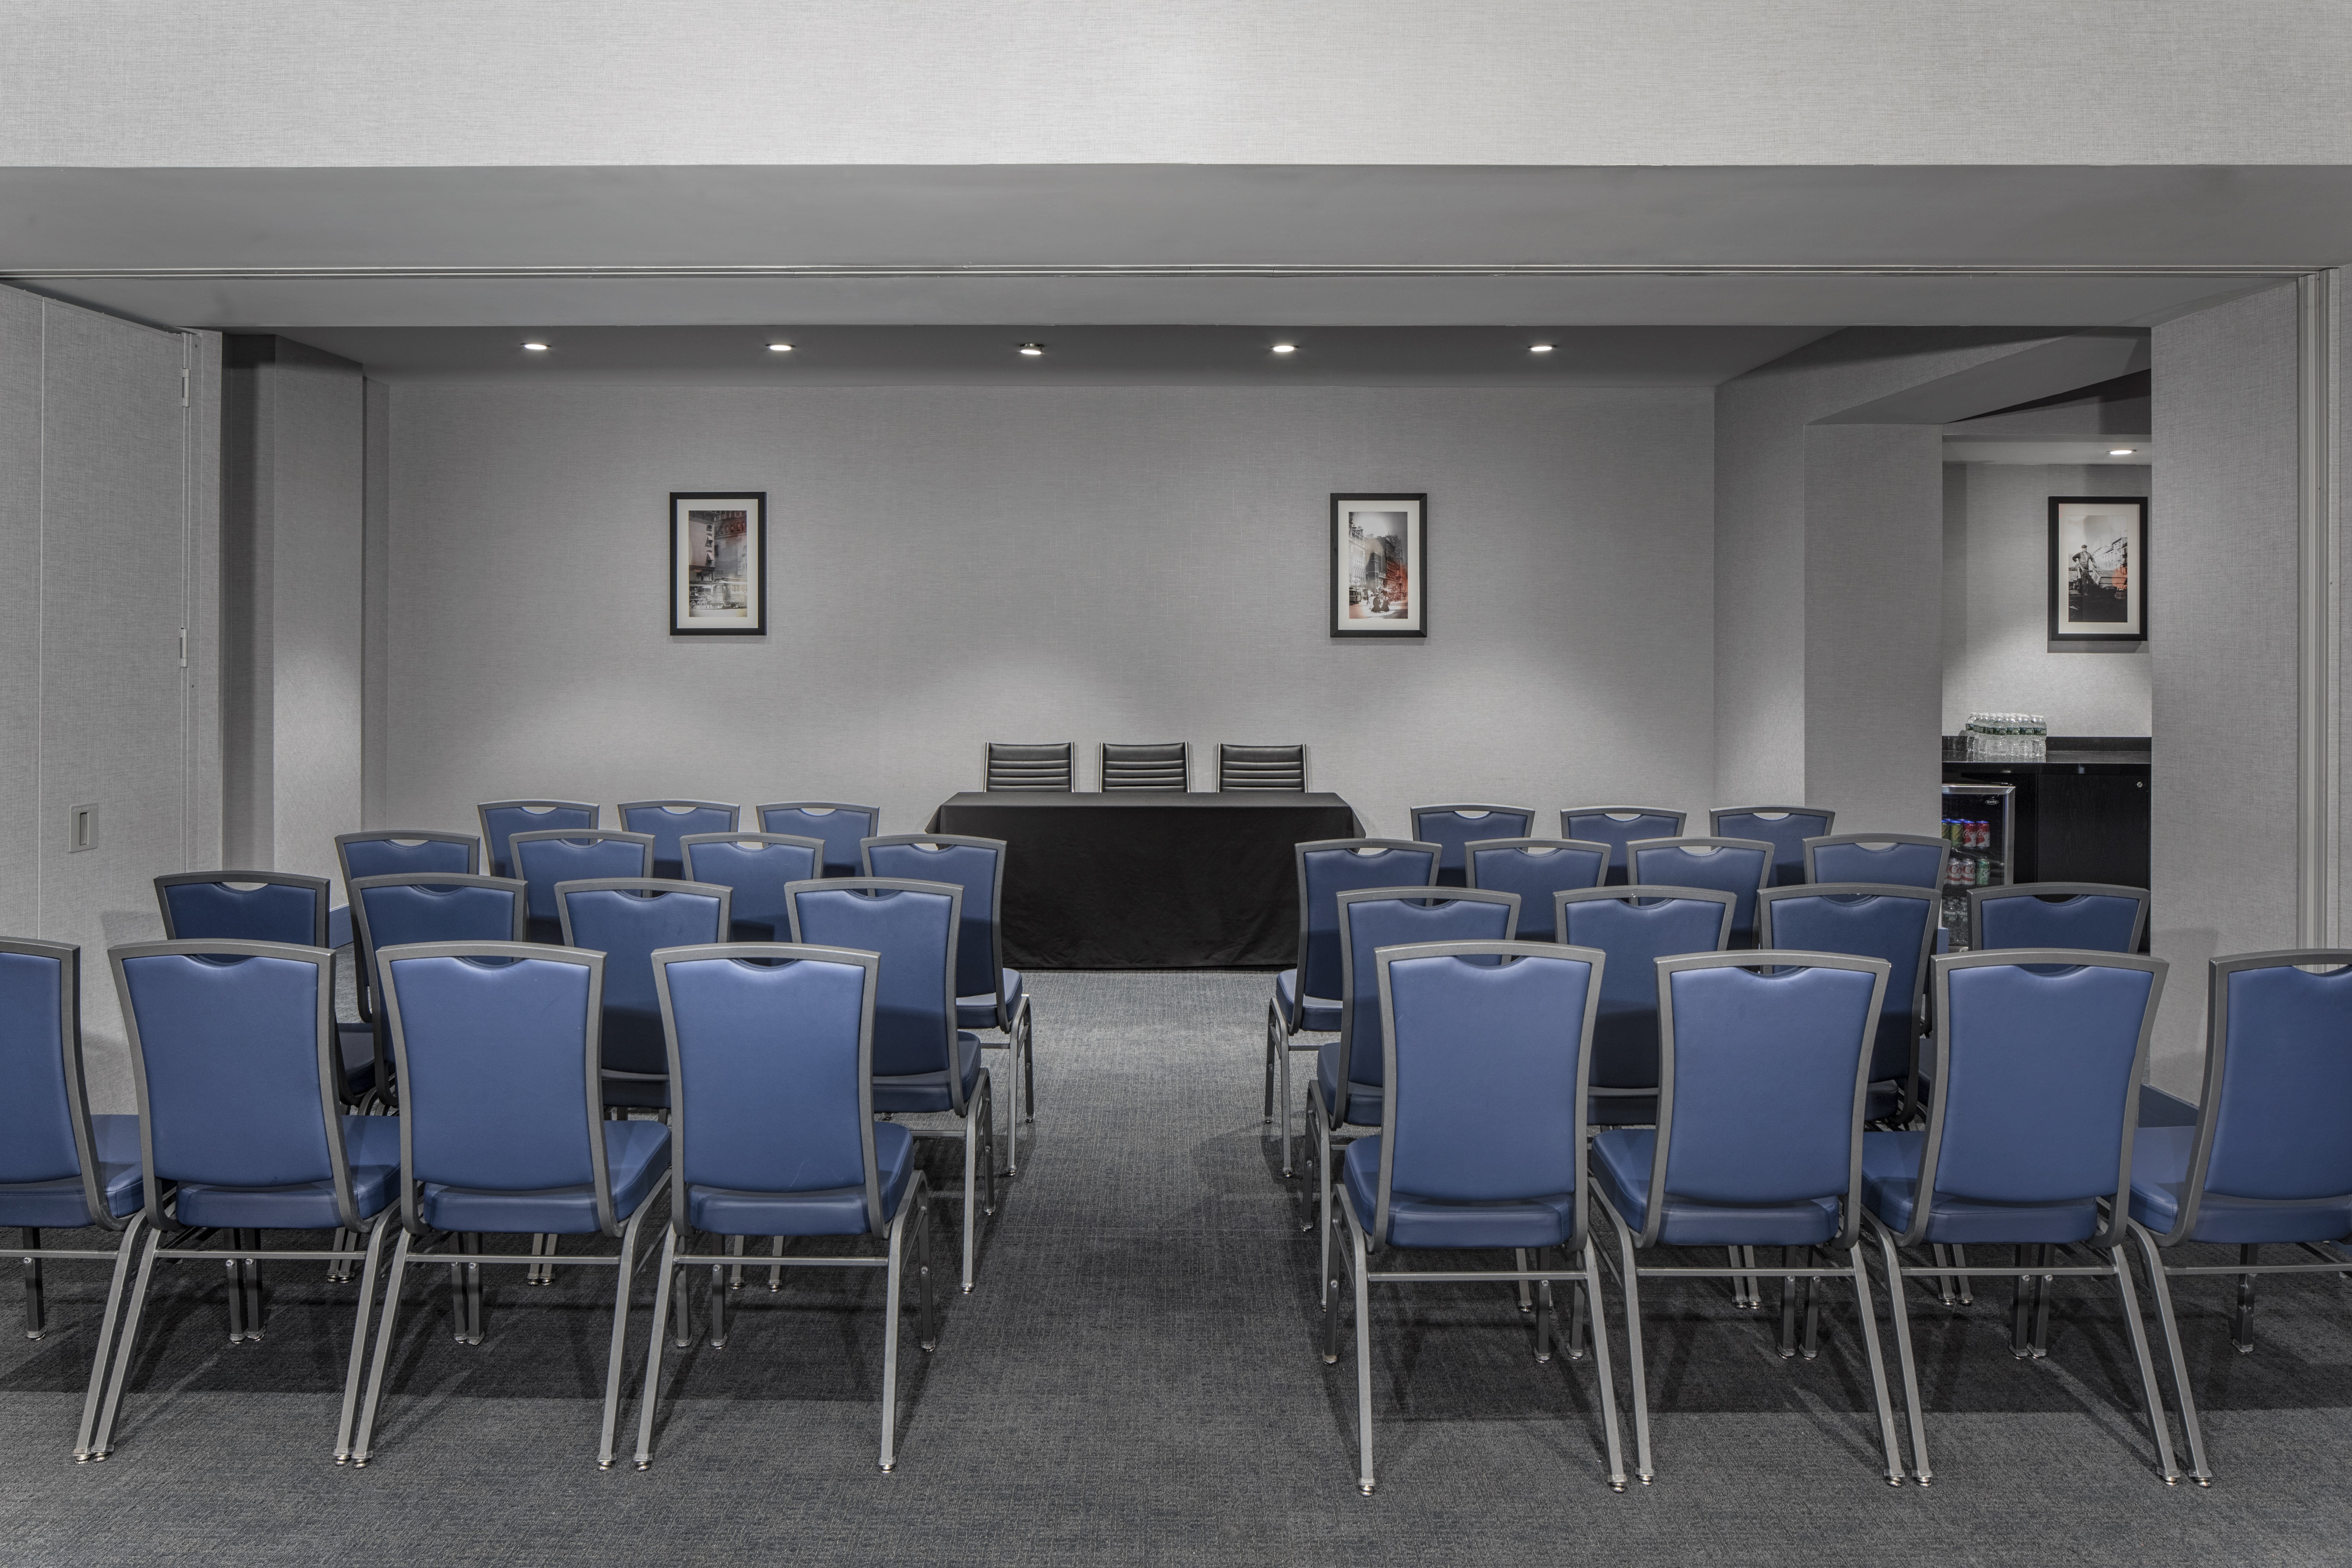 Meeting Room Arranged Theater Style With Rows of Blue Chairs Facing Wall Art ans Speaker's Table With Two Chairs and View of Refreshment Area